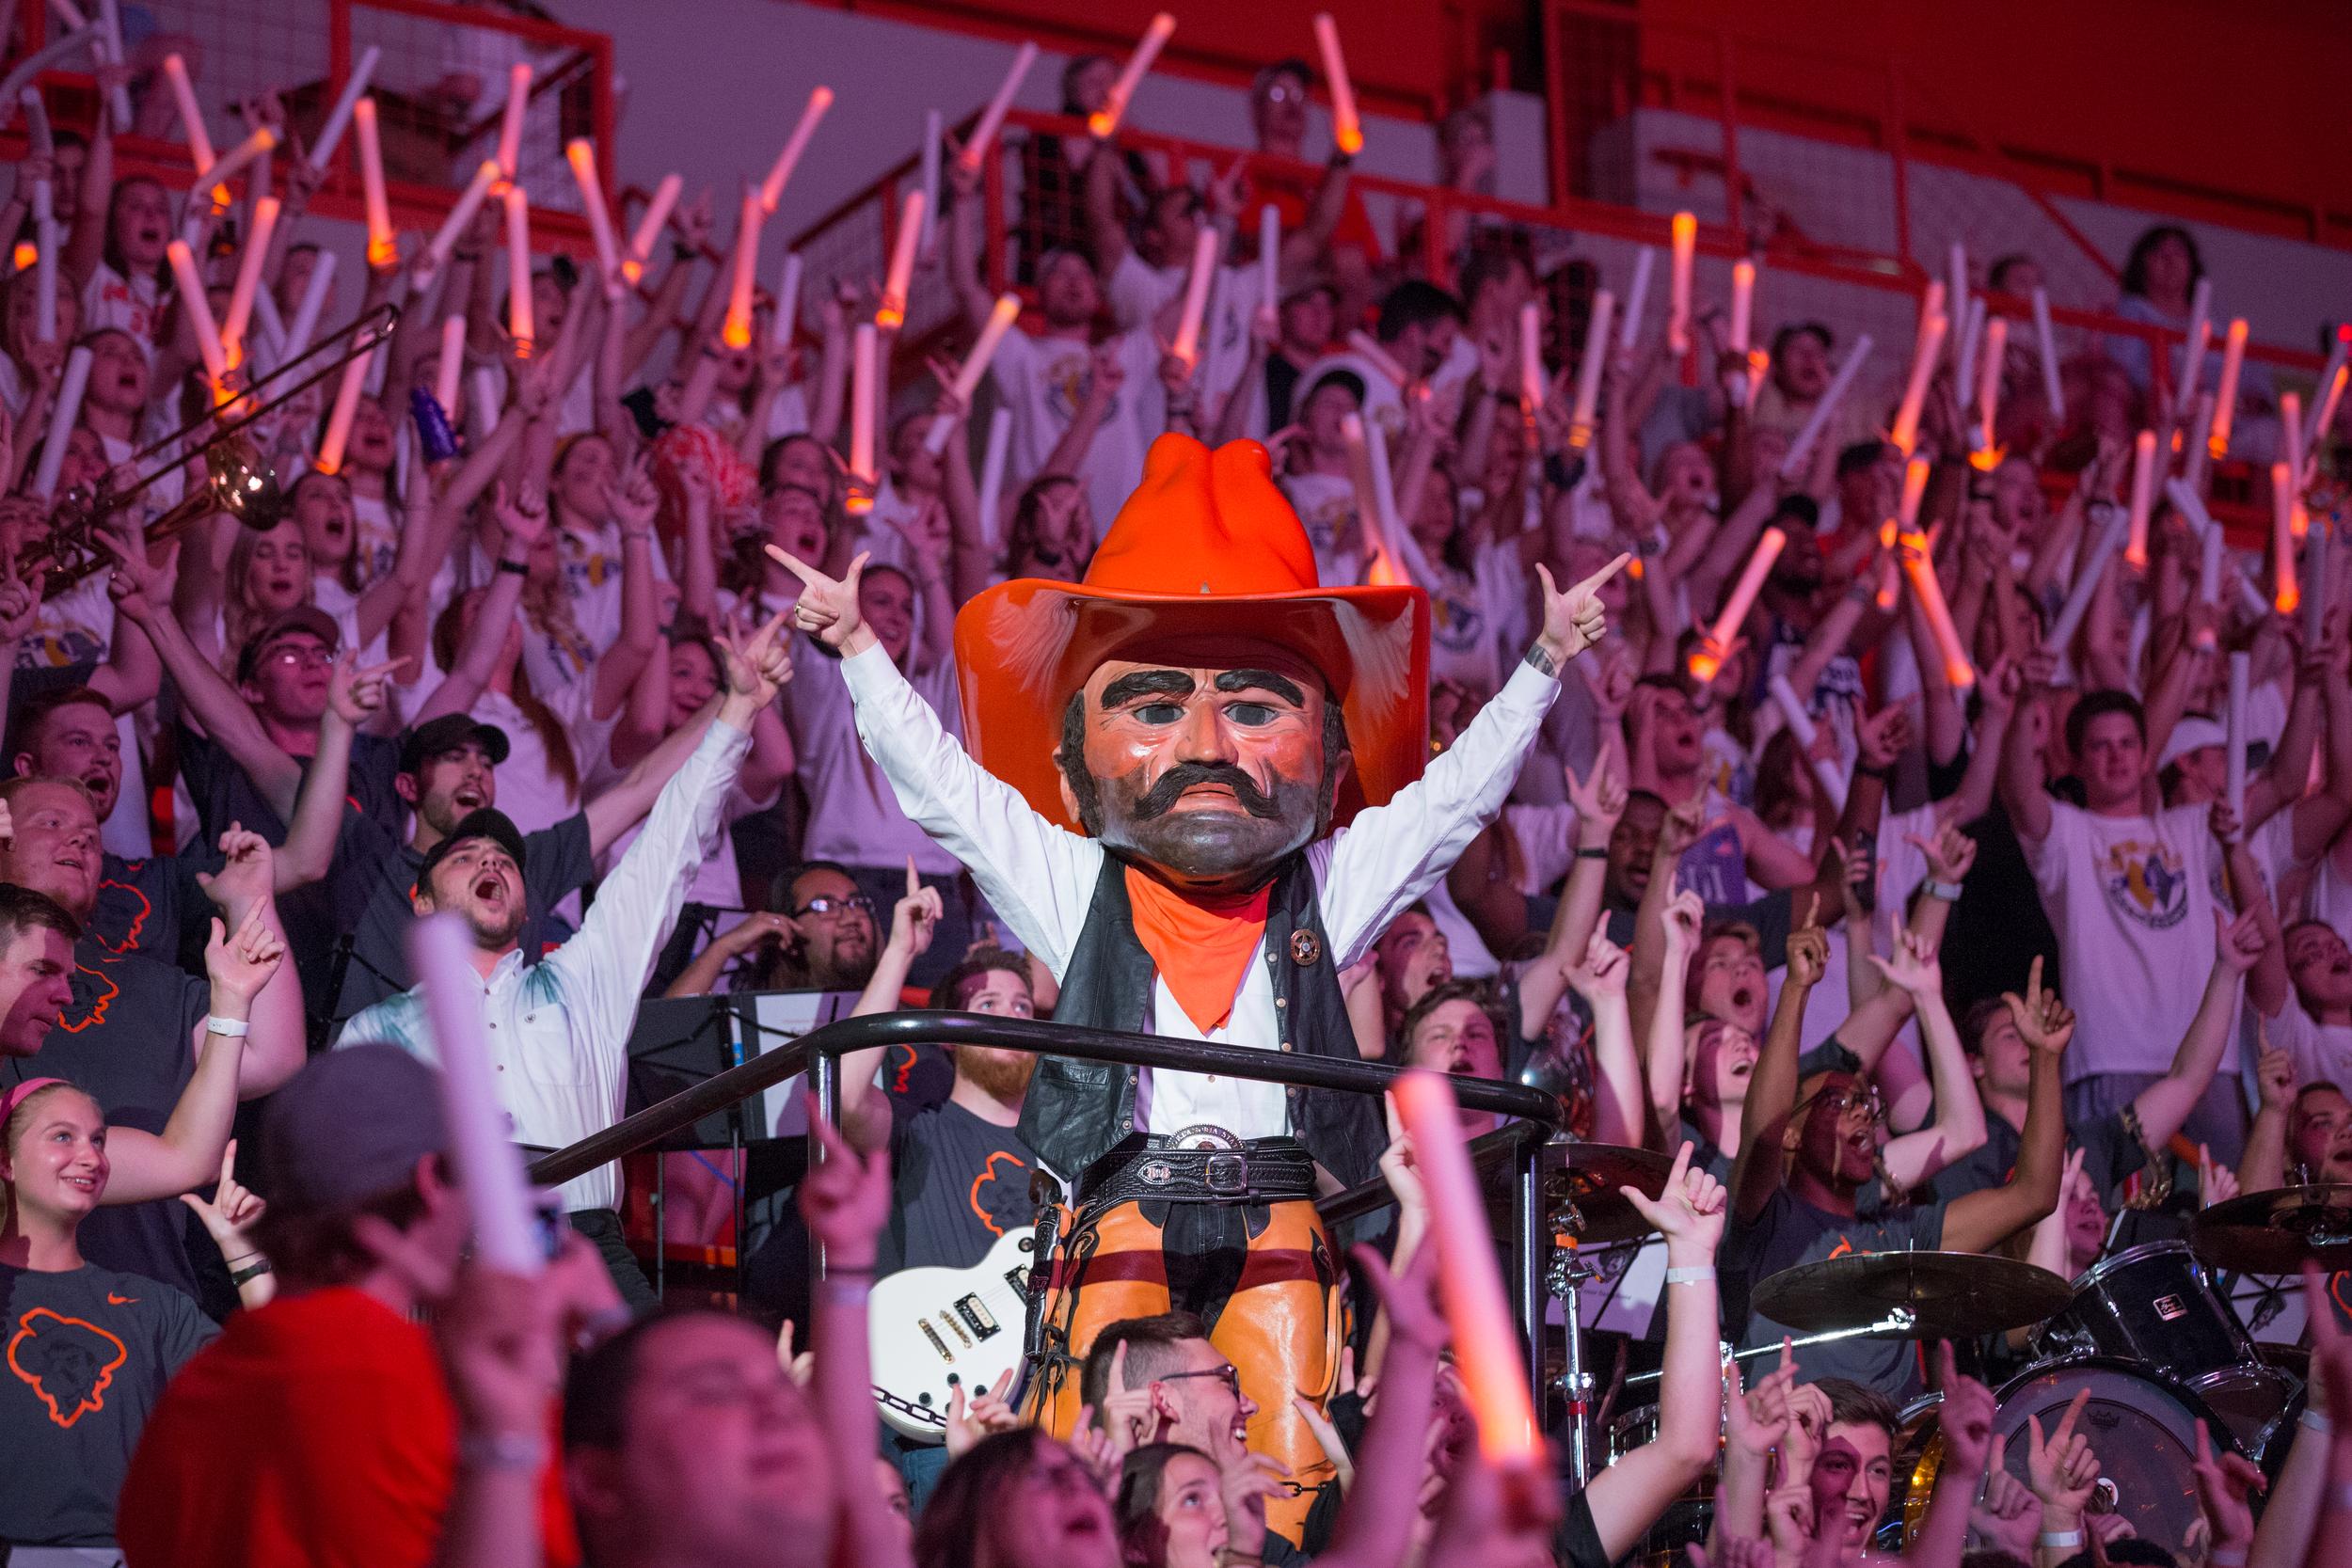 Pistol Pete stands on a platform at OSU's homecoming & hoops event, surrounded by students holding orange glow sticks and showing the go pokes gesture.